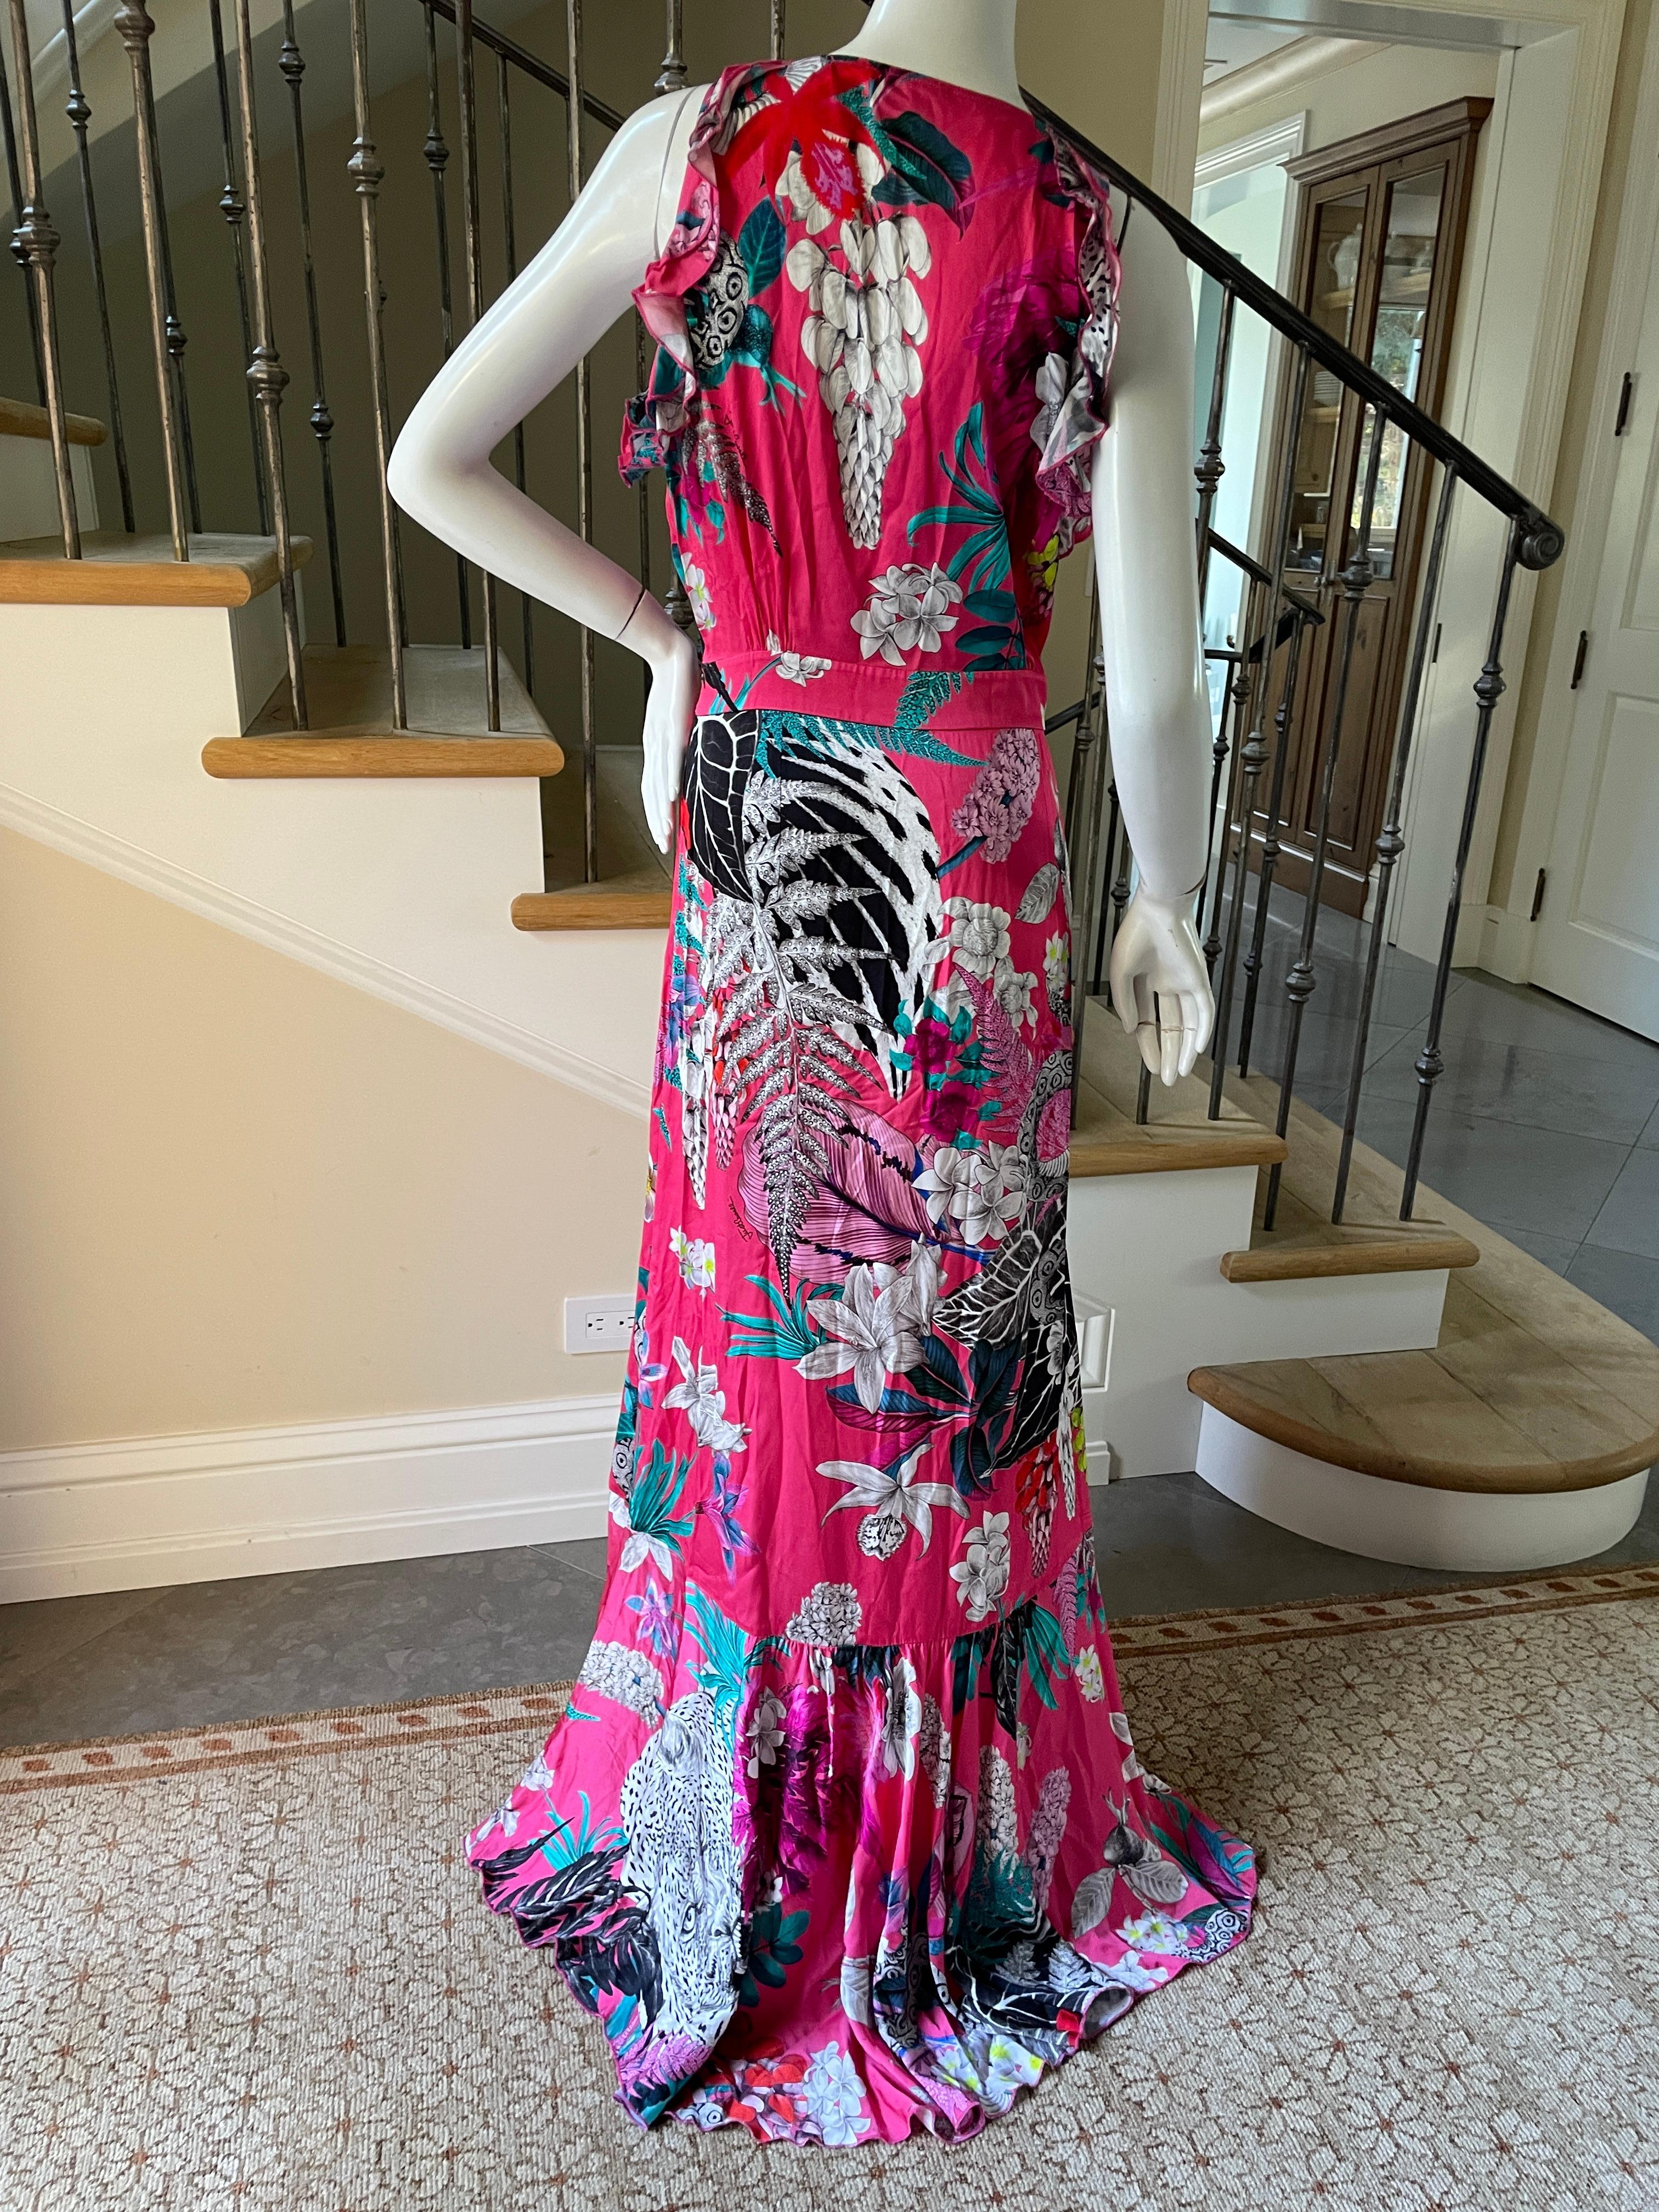 Just Cavalli Ruffled Flamenco Style Evening Dress by Roberto Cavalli Size 48 For Sale 1